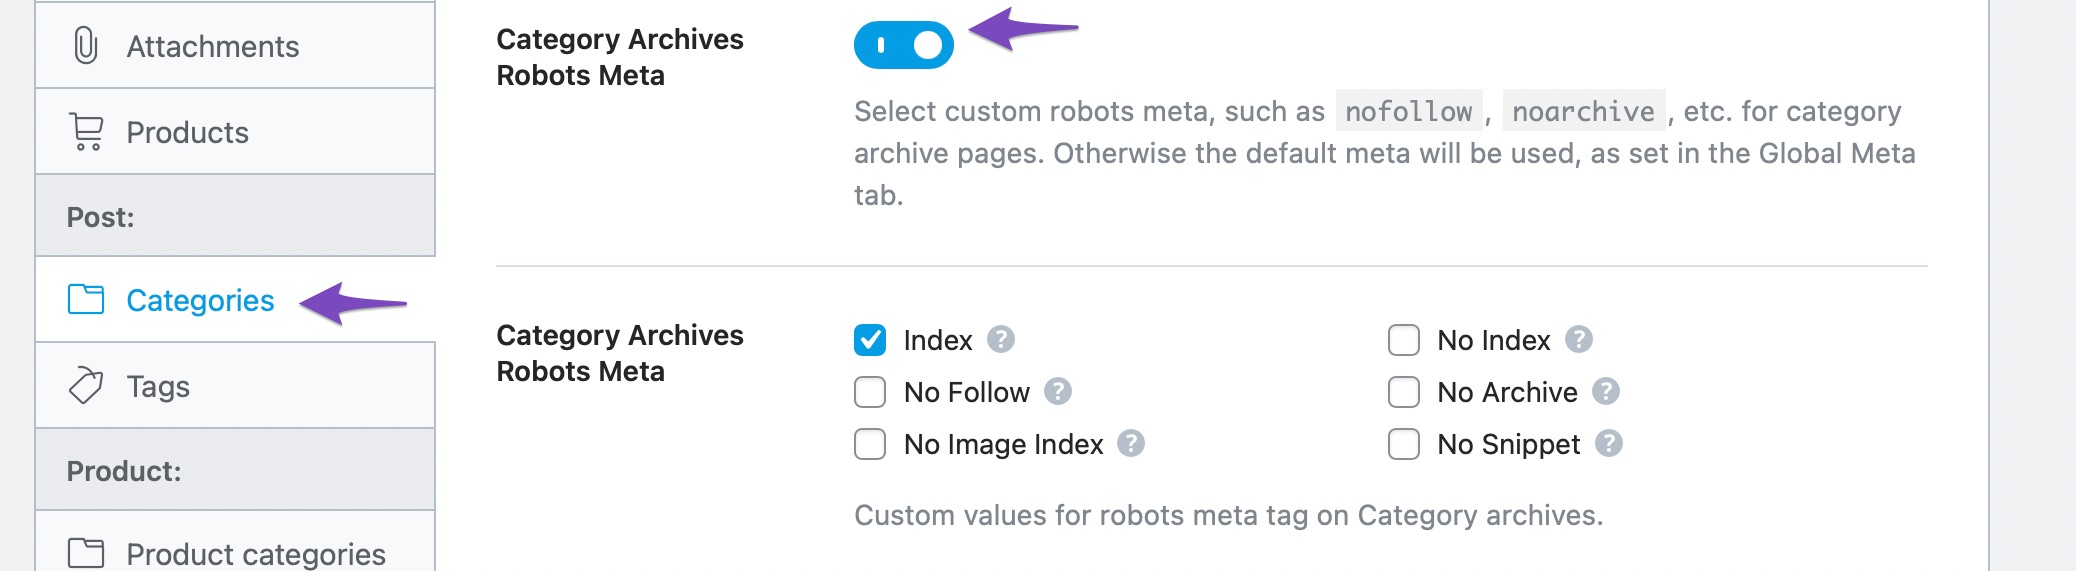 category archive robots meta option